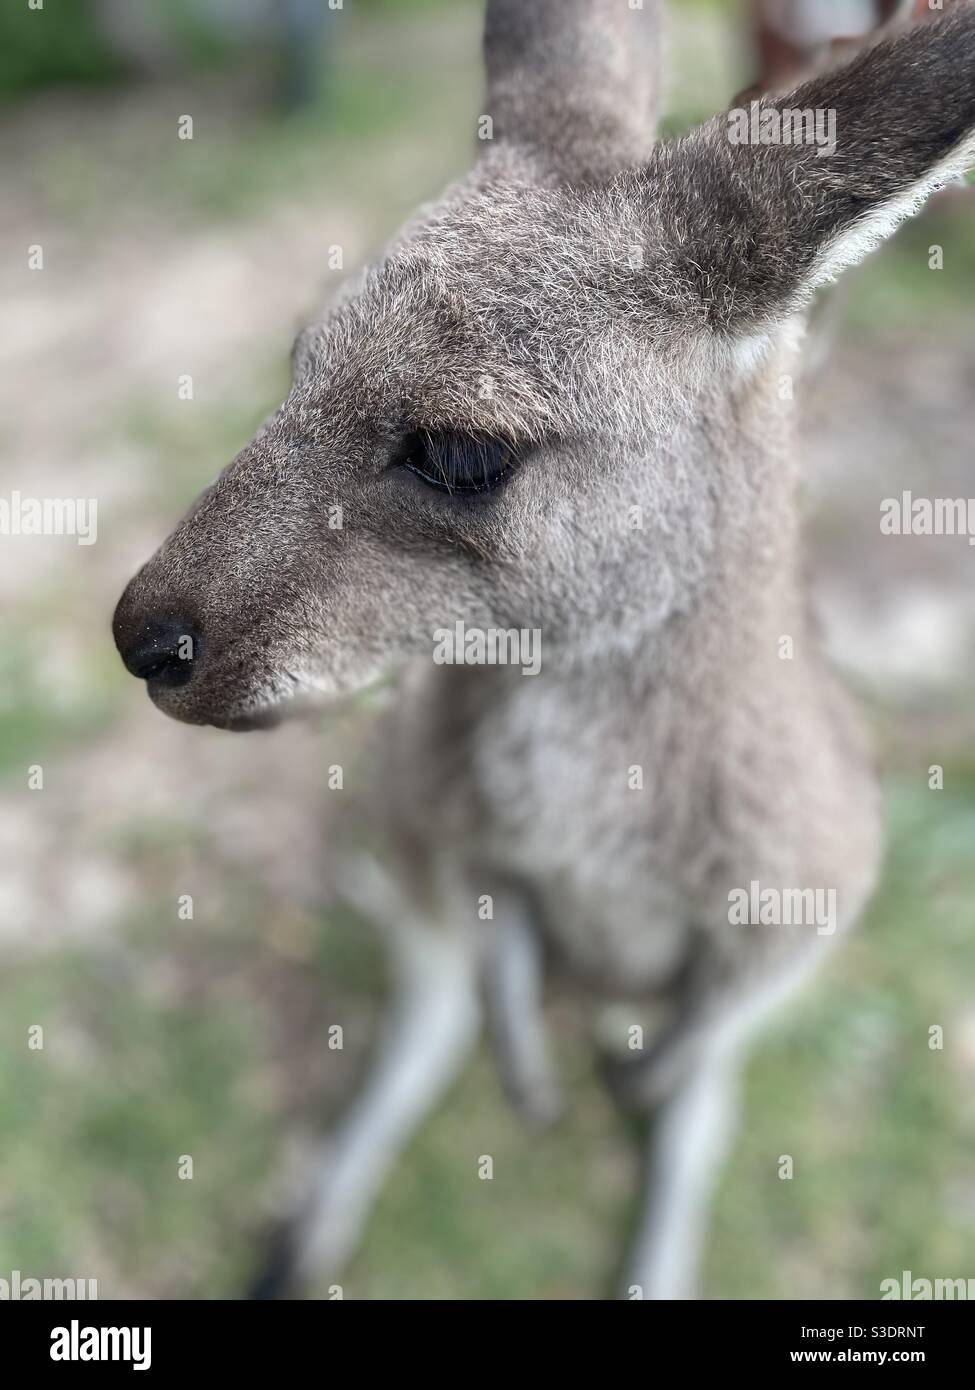 Close-up portrait of young Eastern grey kangaroo. Looking down at a kangaroo, fully body with focus on the head. Vertical portrait of Australian kangaroo. Stock Photo